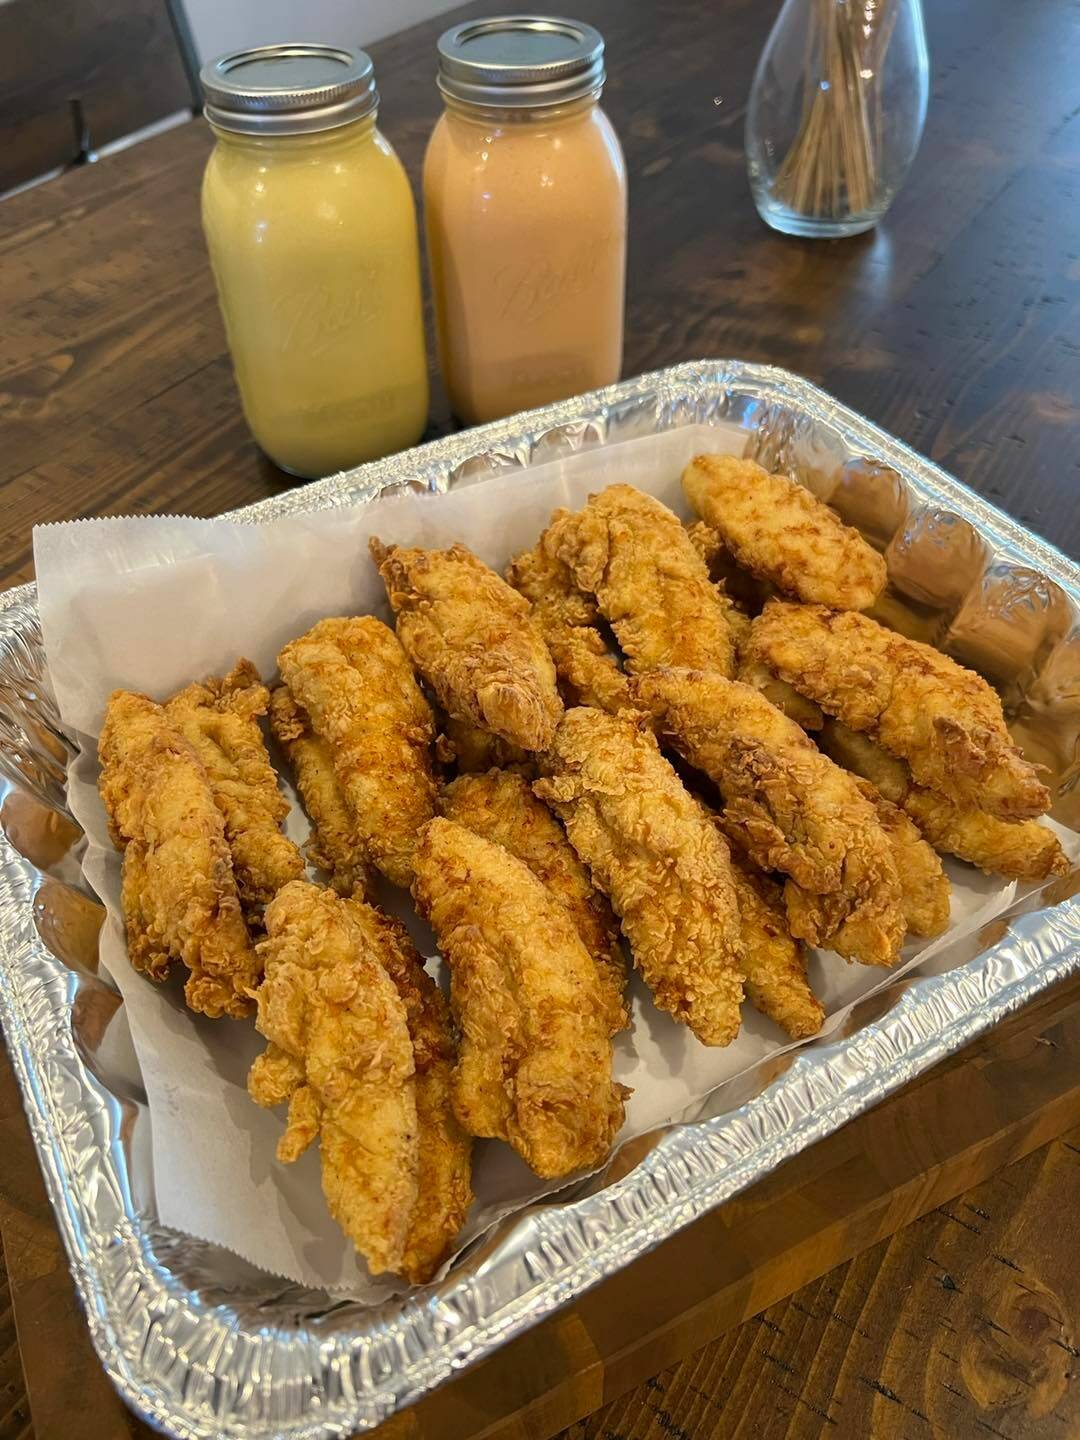 Photo provided
Hale’s kitchen serves southern comfort food like chicken tenders and homemade sauces.